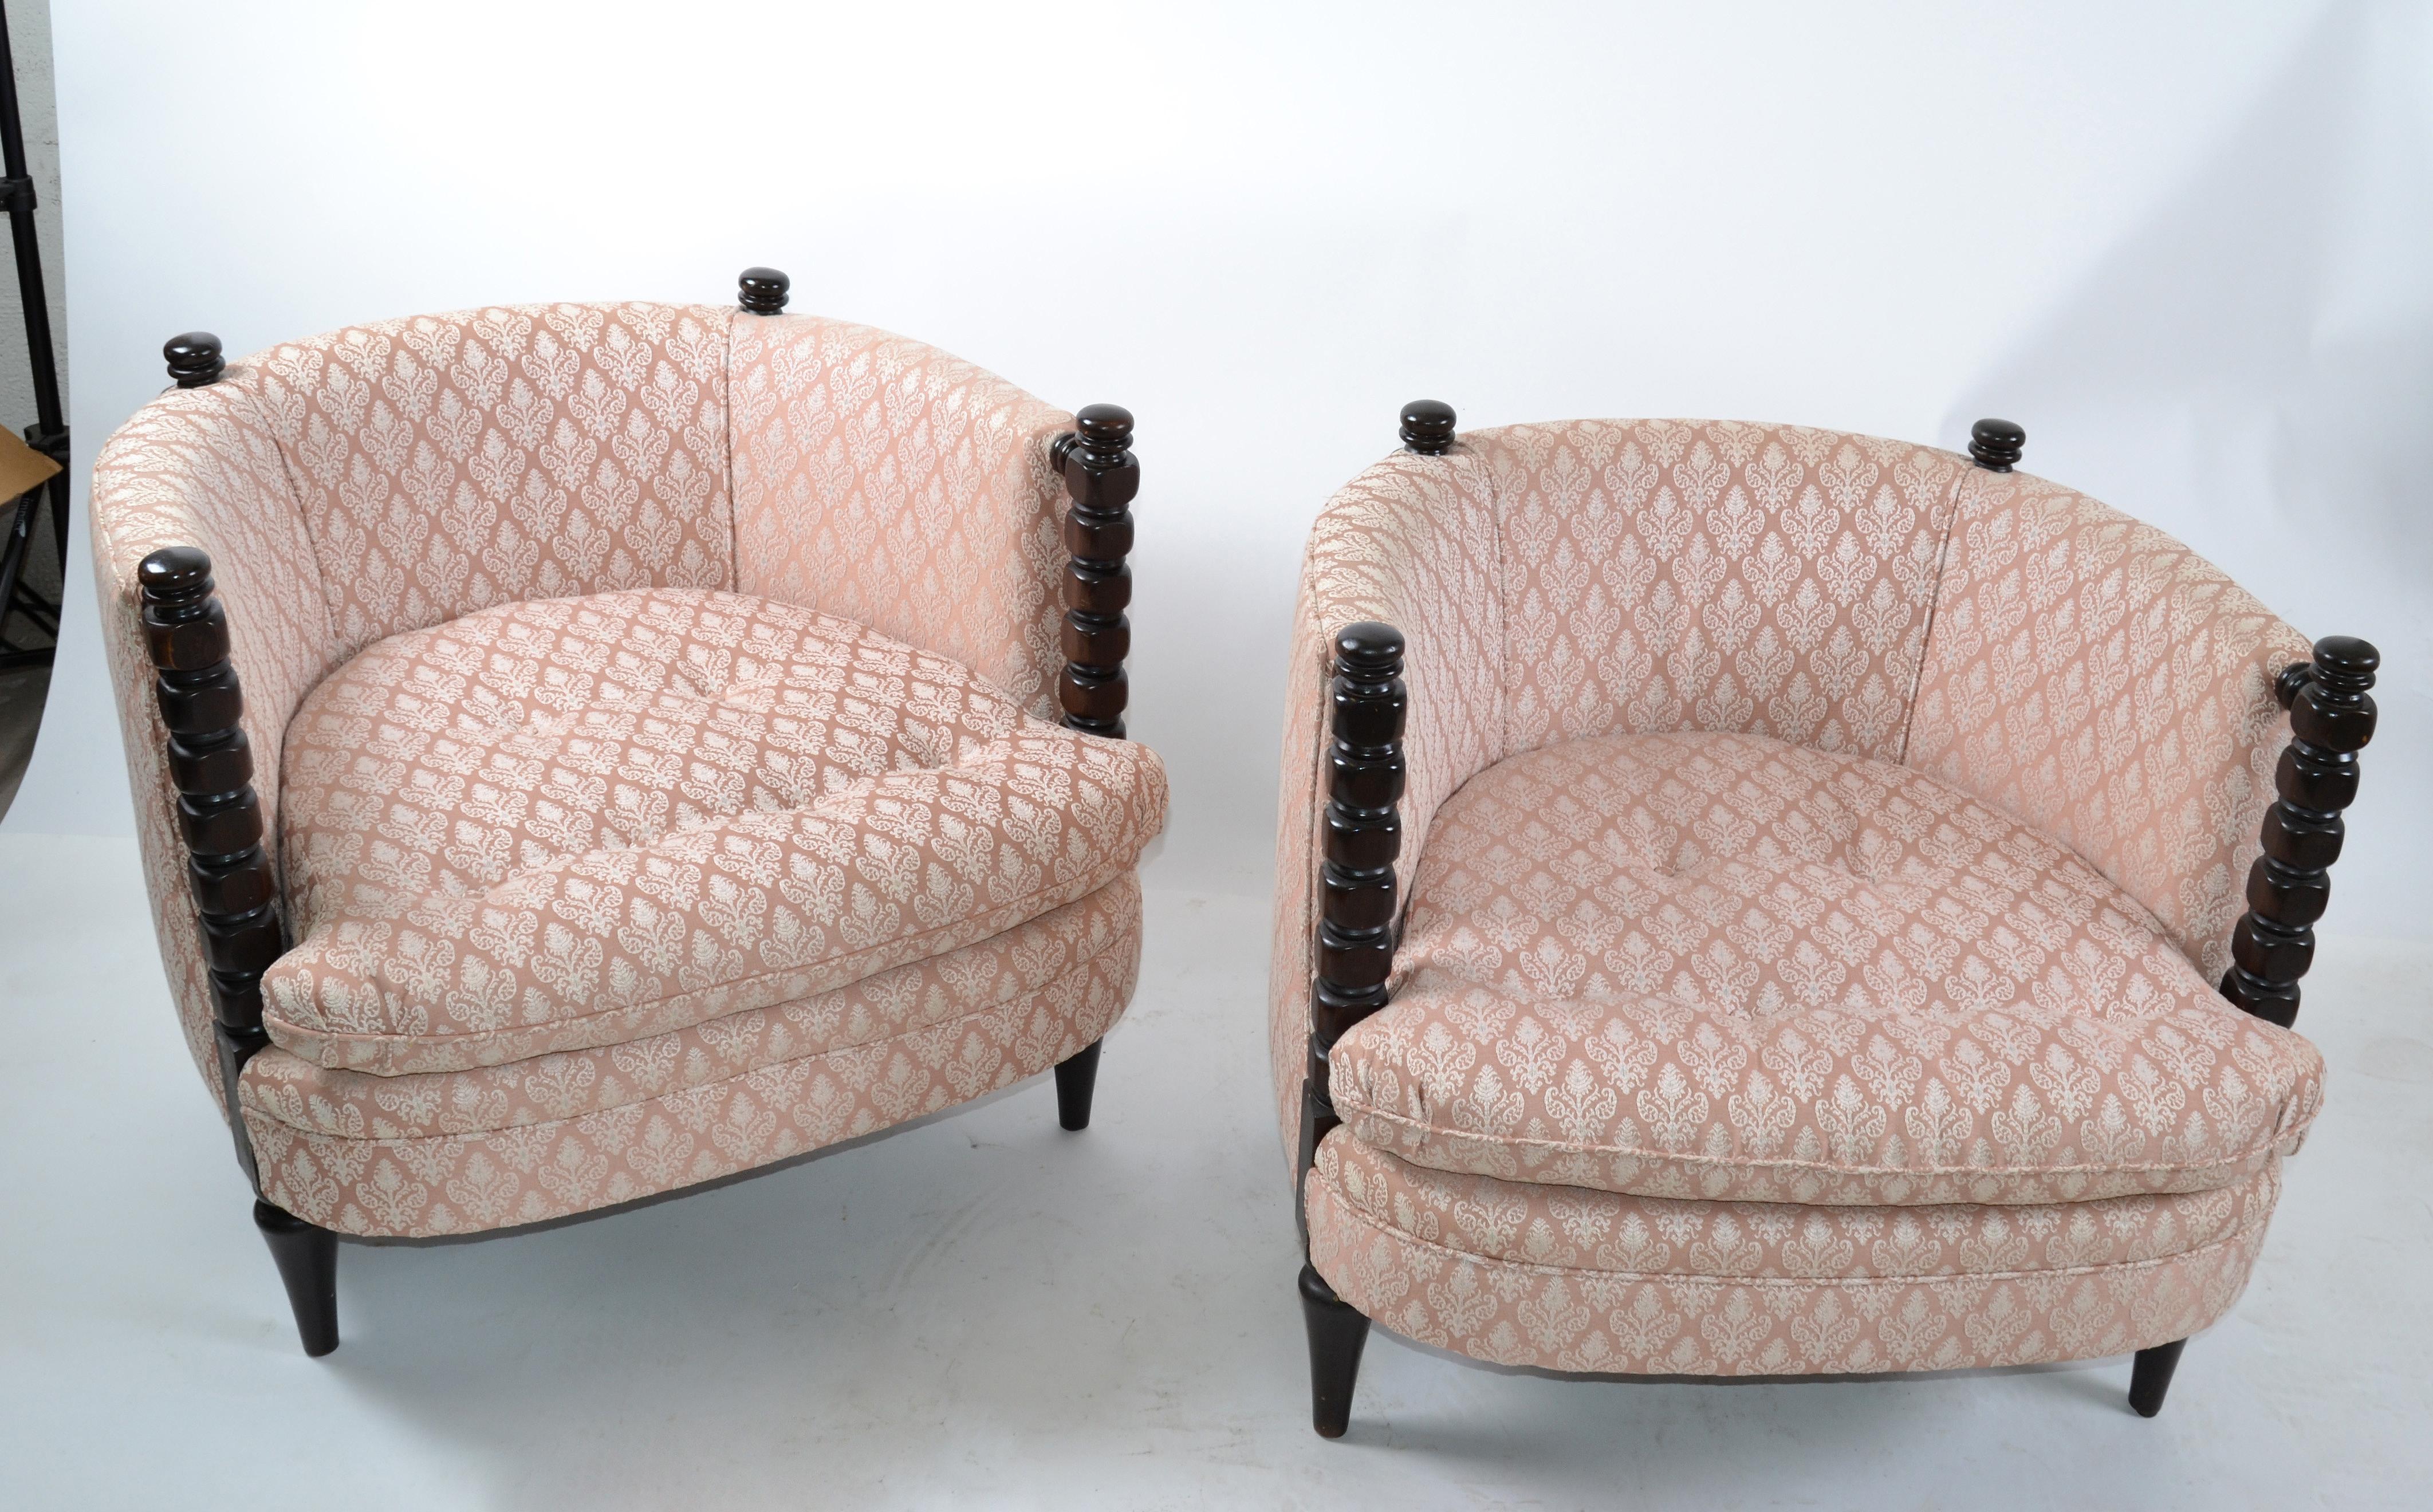 1950s Turned Wood and Tufted Fabric Upholstery Barrel Chairs, Club Chairs, Pair 7